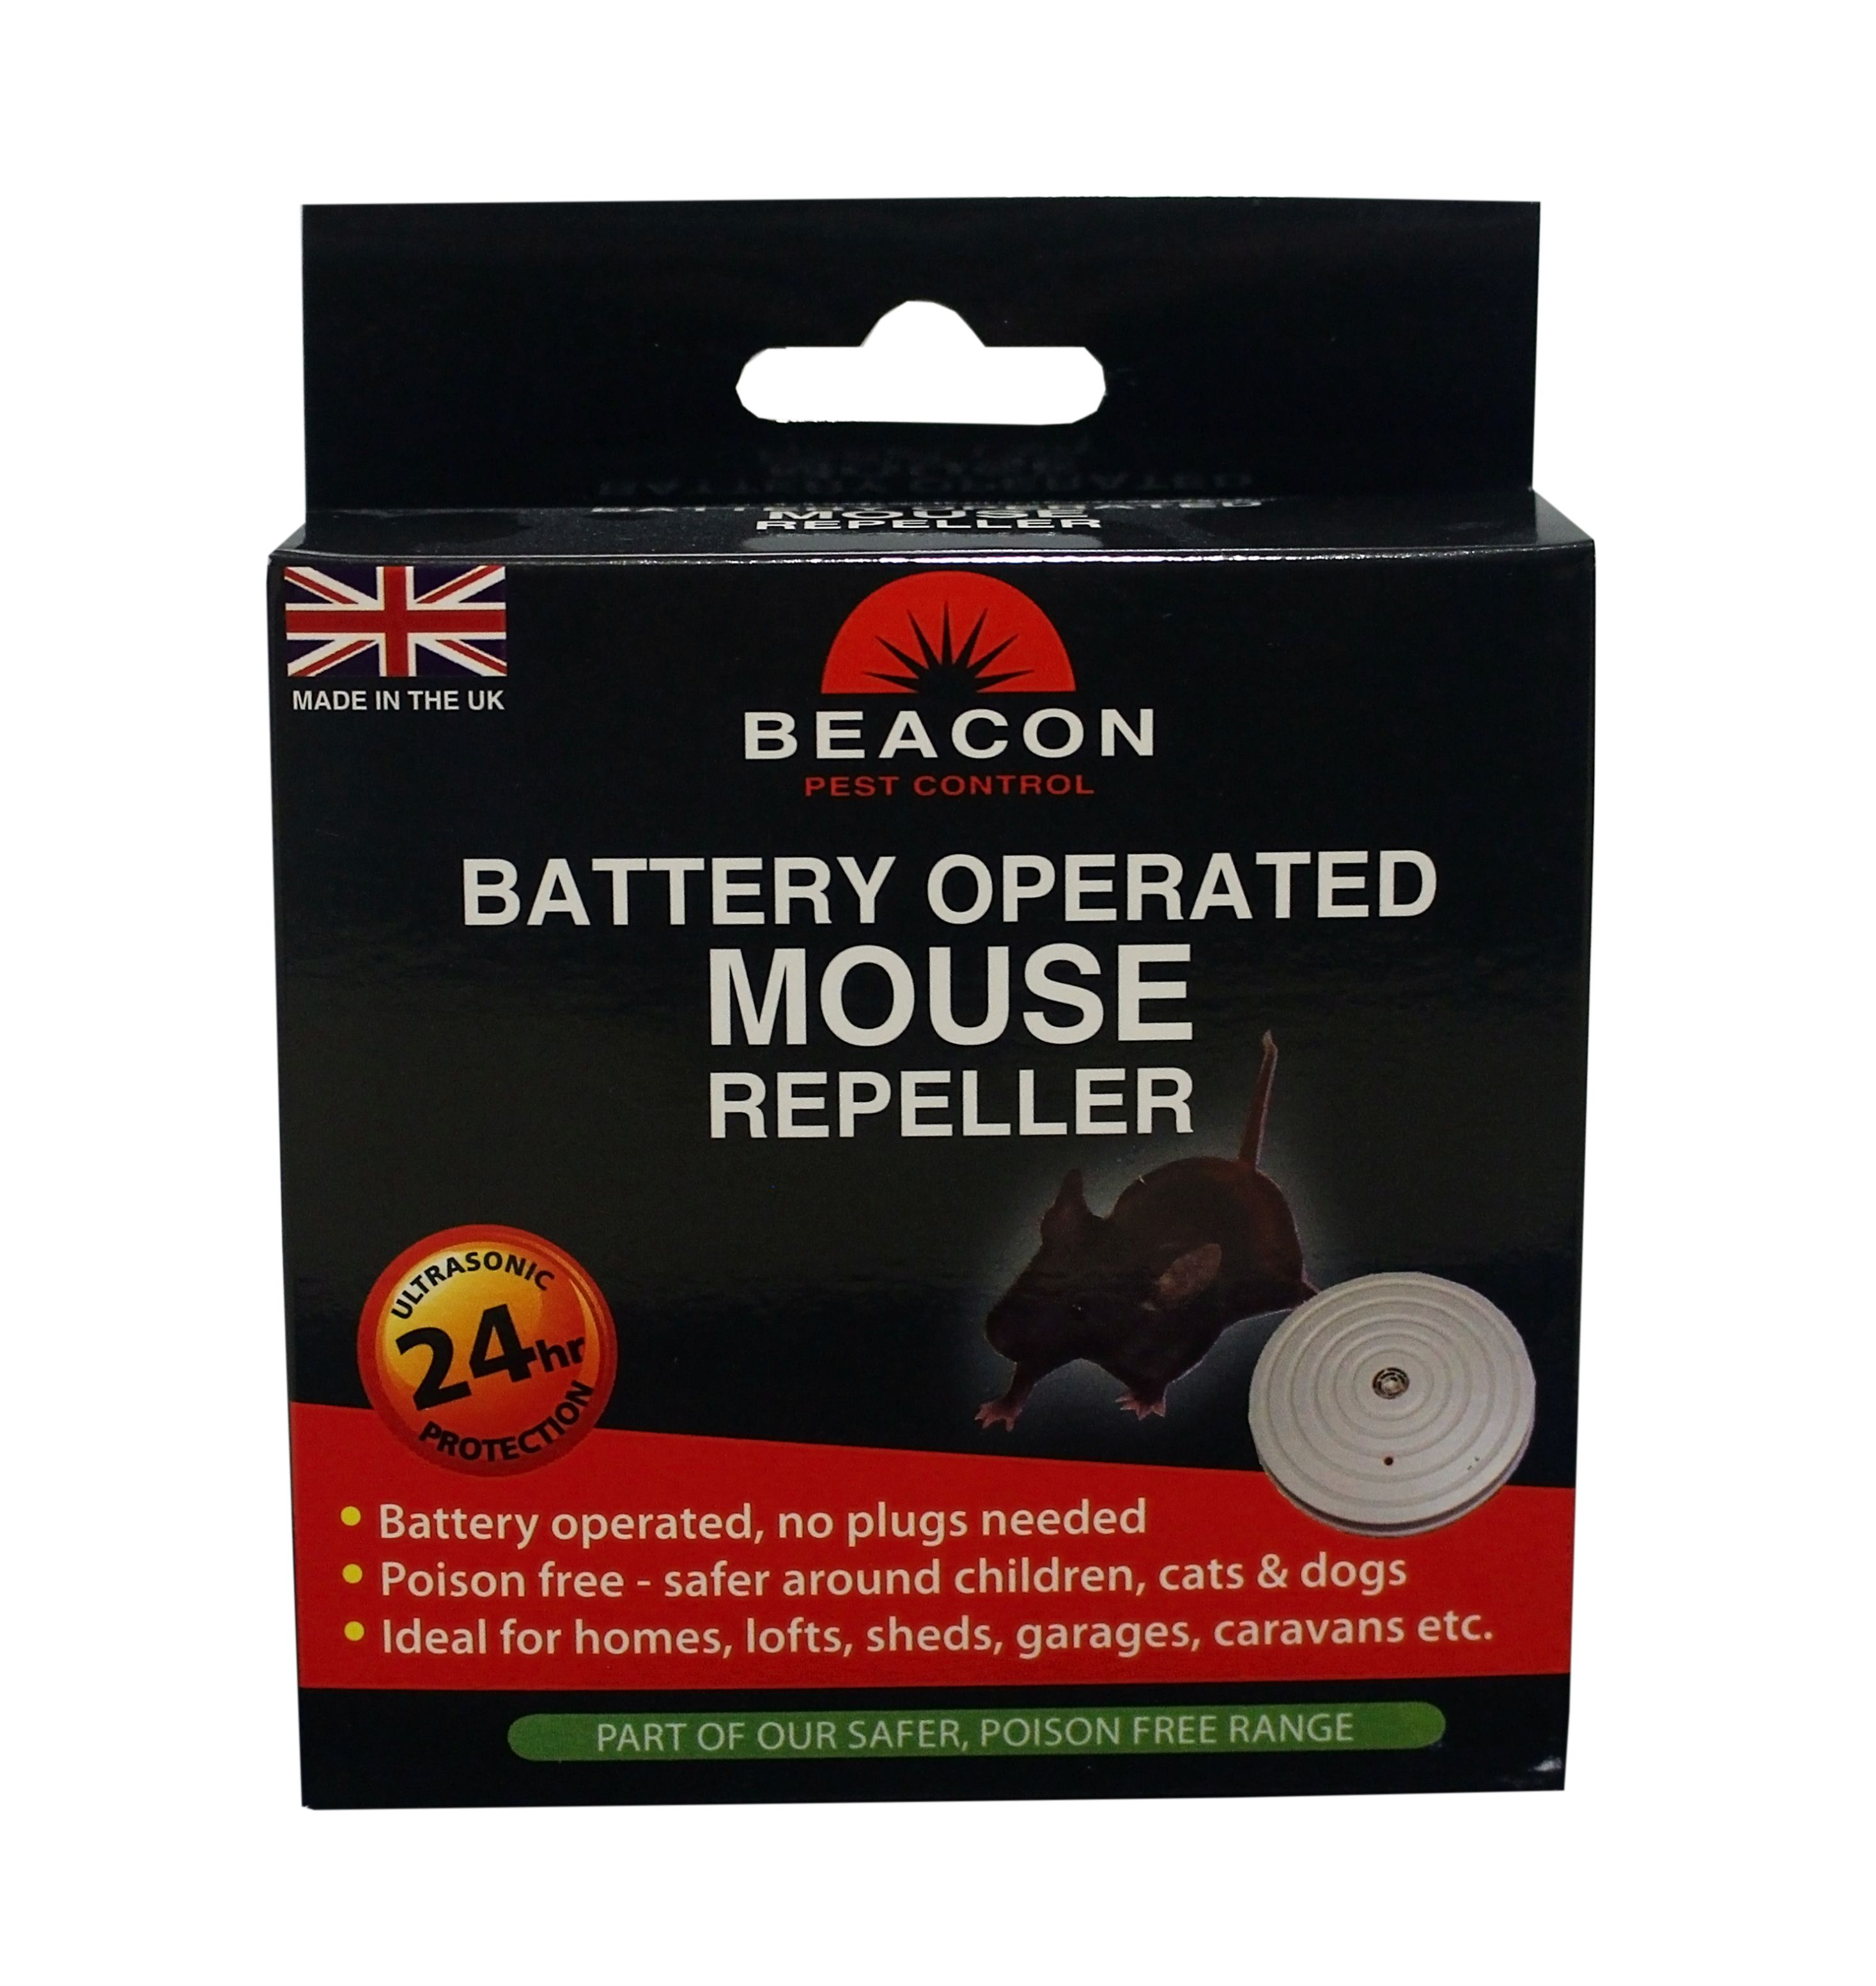 Beacon Battery Operated Mouse Repeller